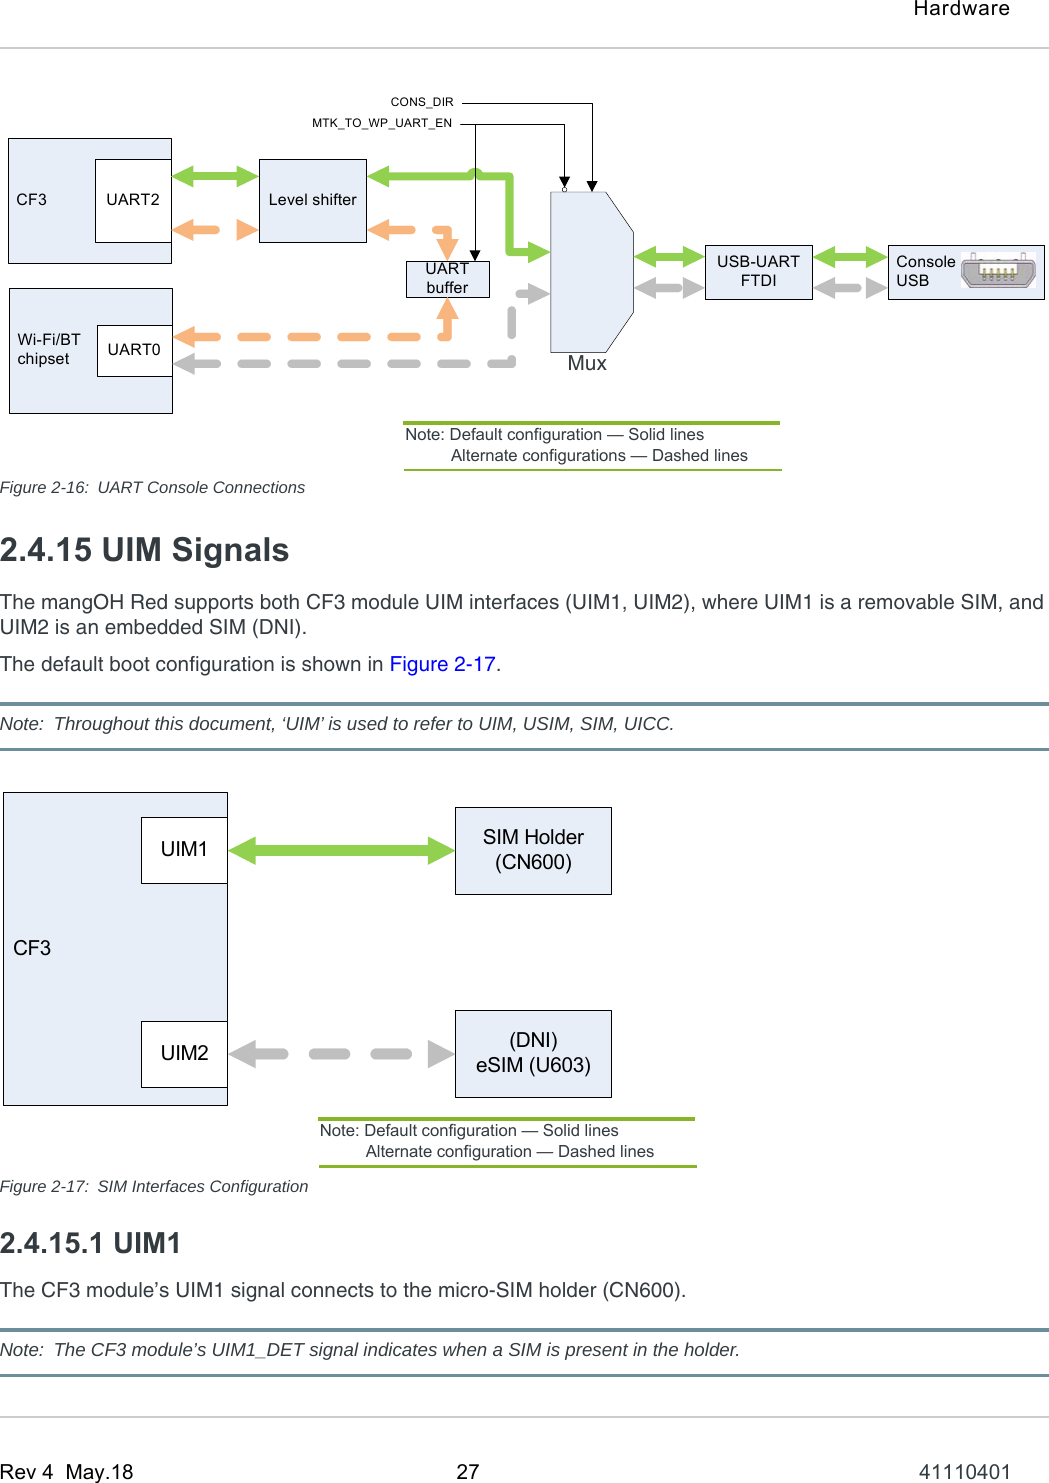 HardwareRev 4  May.18 27 41110401Figure 2-16: UART Console Connections2.4.15 UIM SignalsThe mangOH Red supports both CF3 module UIM interfaces (UIM1, UIM2), where UIM1 is a removable SIM, and UIM2 is an embedded SIM (DNI).The default boot configuration is shown in Figure 2-17.Note: Throughout this document, ‘UIM’ is used to refer to UIM, USIM, SIM, UICC.Figure 2-17: SIM Interfaces Configuration2.4.15.1 UIM1The CF3 module’s UIM1 signal connects to the micro-SIM holder (CN600).Note: The CF3 module’s UIM1_DET signal indicates when a SIM is present in the holder.                         CF3 UART2Wi-Fi/BTchipset UART0Level shifterUSB-UARTFTDIConsoleUSBCONS_DIRMTK_TO_WP_UART_ENUART buffer                         MuxNote: Default configuration — Solid lines          Alternate configurations — Dashed linesSIM Holder (CN600)(DNI)eSIM (U603)CF3UIM1UIM2Note: Default configuration — Solid lines          Alternate configuration — Dashed lines